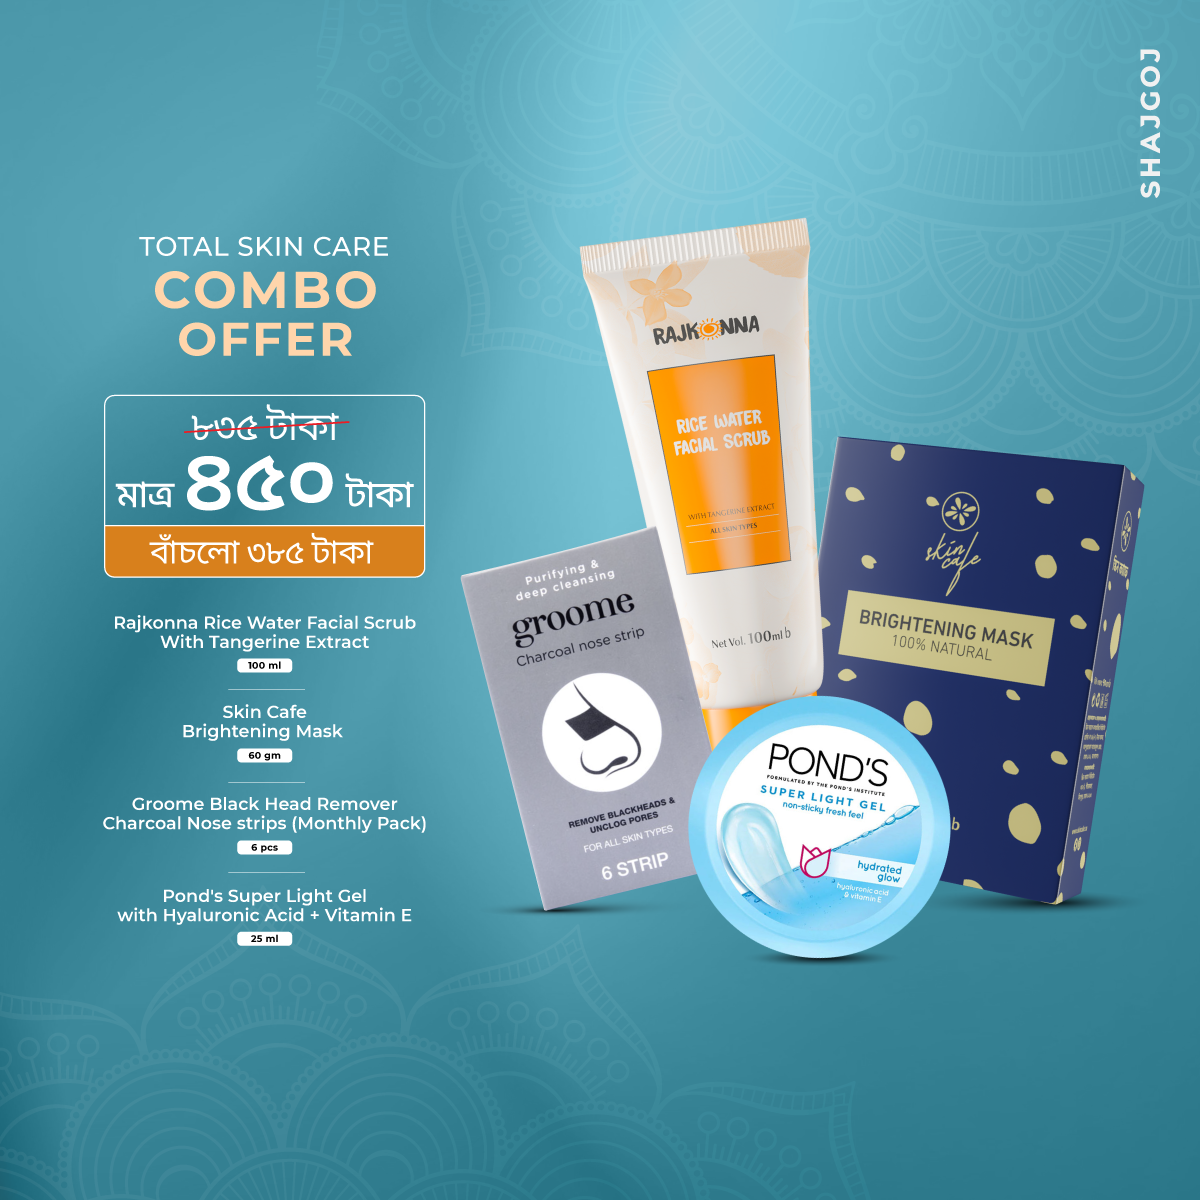 Total Skin Care Combo Offer ( Pond’s Super Light Gel with Hyaluronic Acid + Vitamin E 25.0 ml+Rajkonna Rice Water Facial Scrub With Tangerine Extract  100.0 ml + Groome Black Head Remover Charcoal Nose strips(Monthly Pack) 6 pcs +Skin Cafe Brightening Mask 70.0 gm)